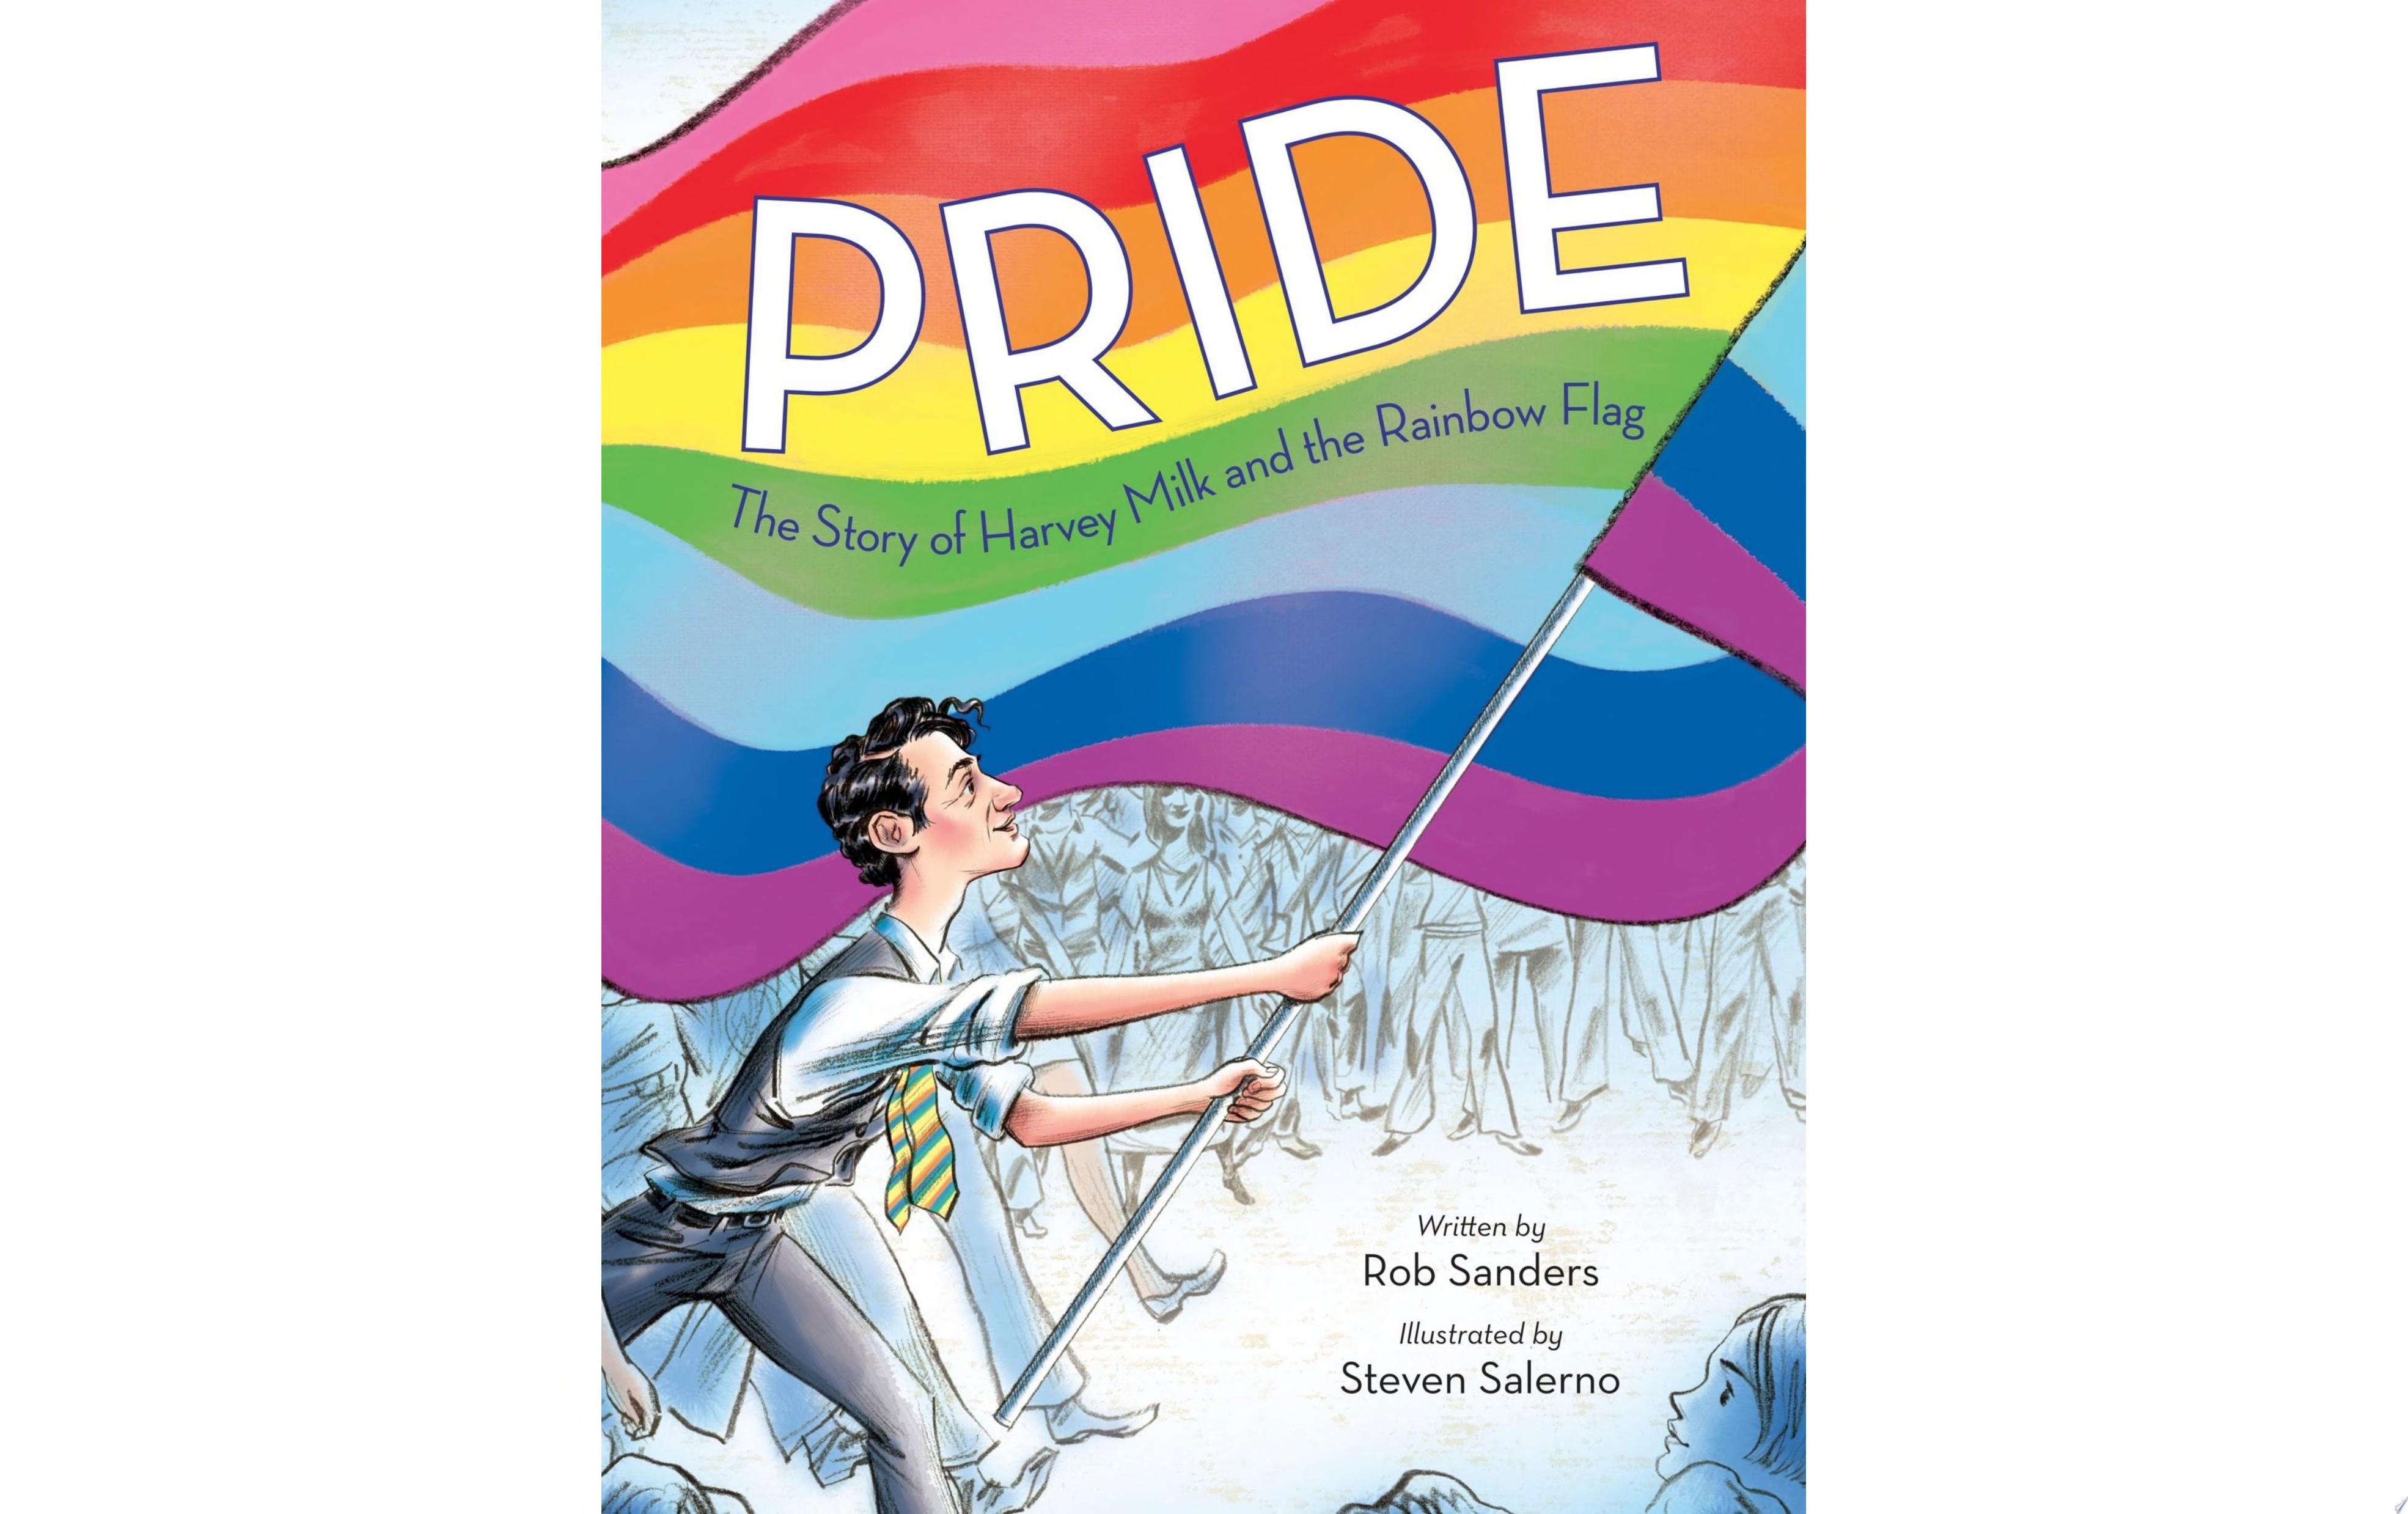 Image for "Pride: The Story of Harvey Milk and the Rainbow Flag"